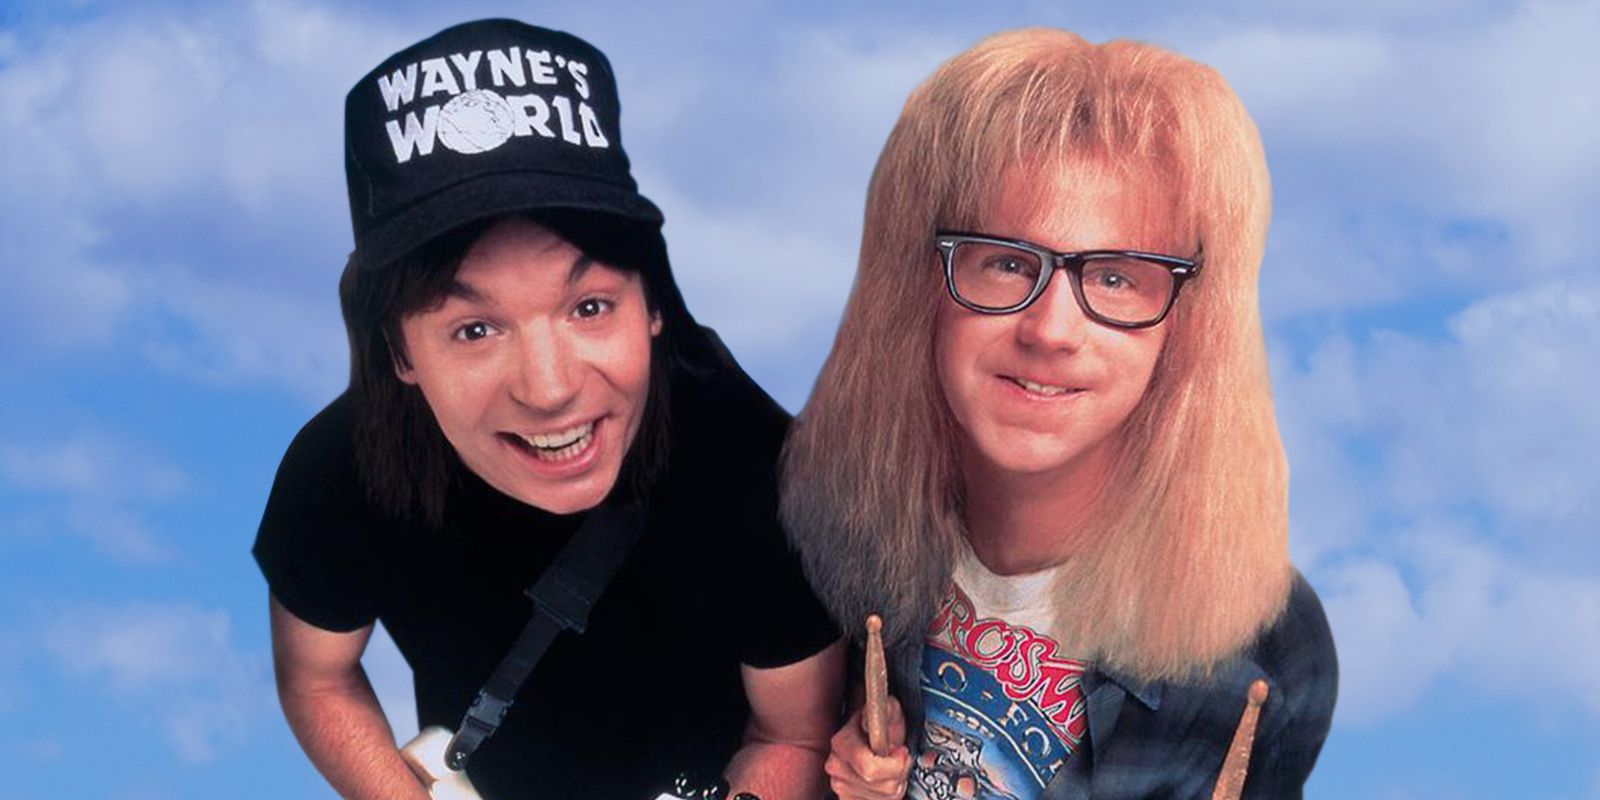 Poster of Wayne's World featuring Wayne and Garth in the sky